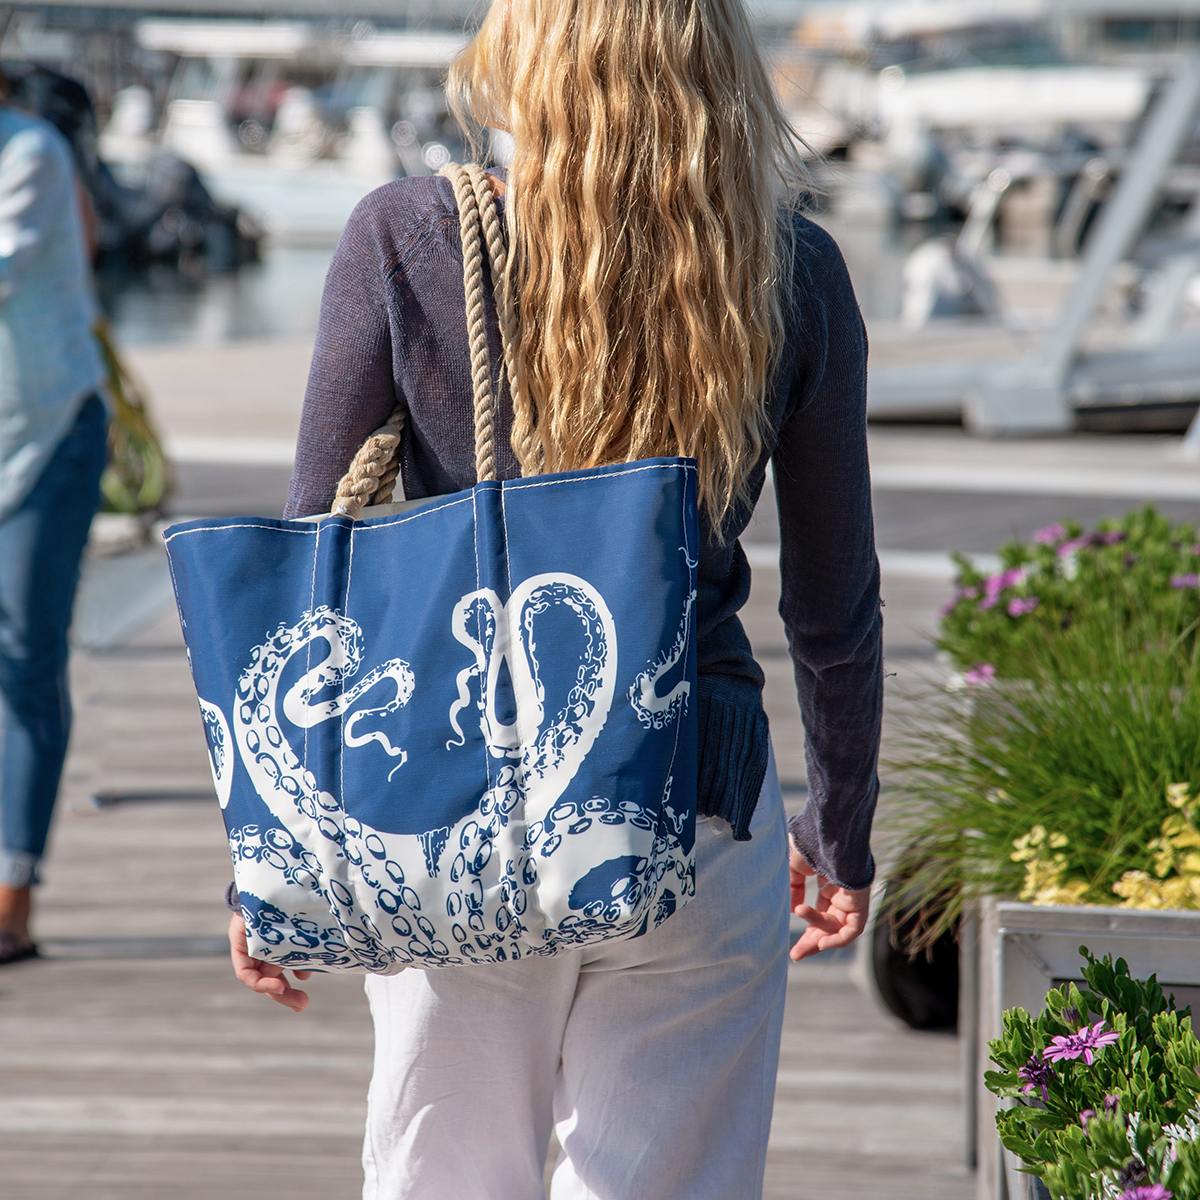 White on Navy Octopus Tote